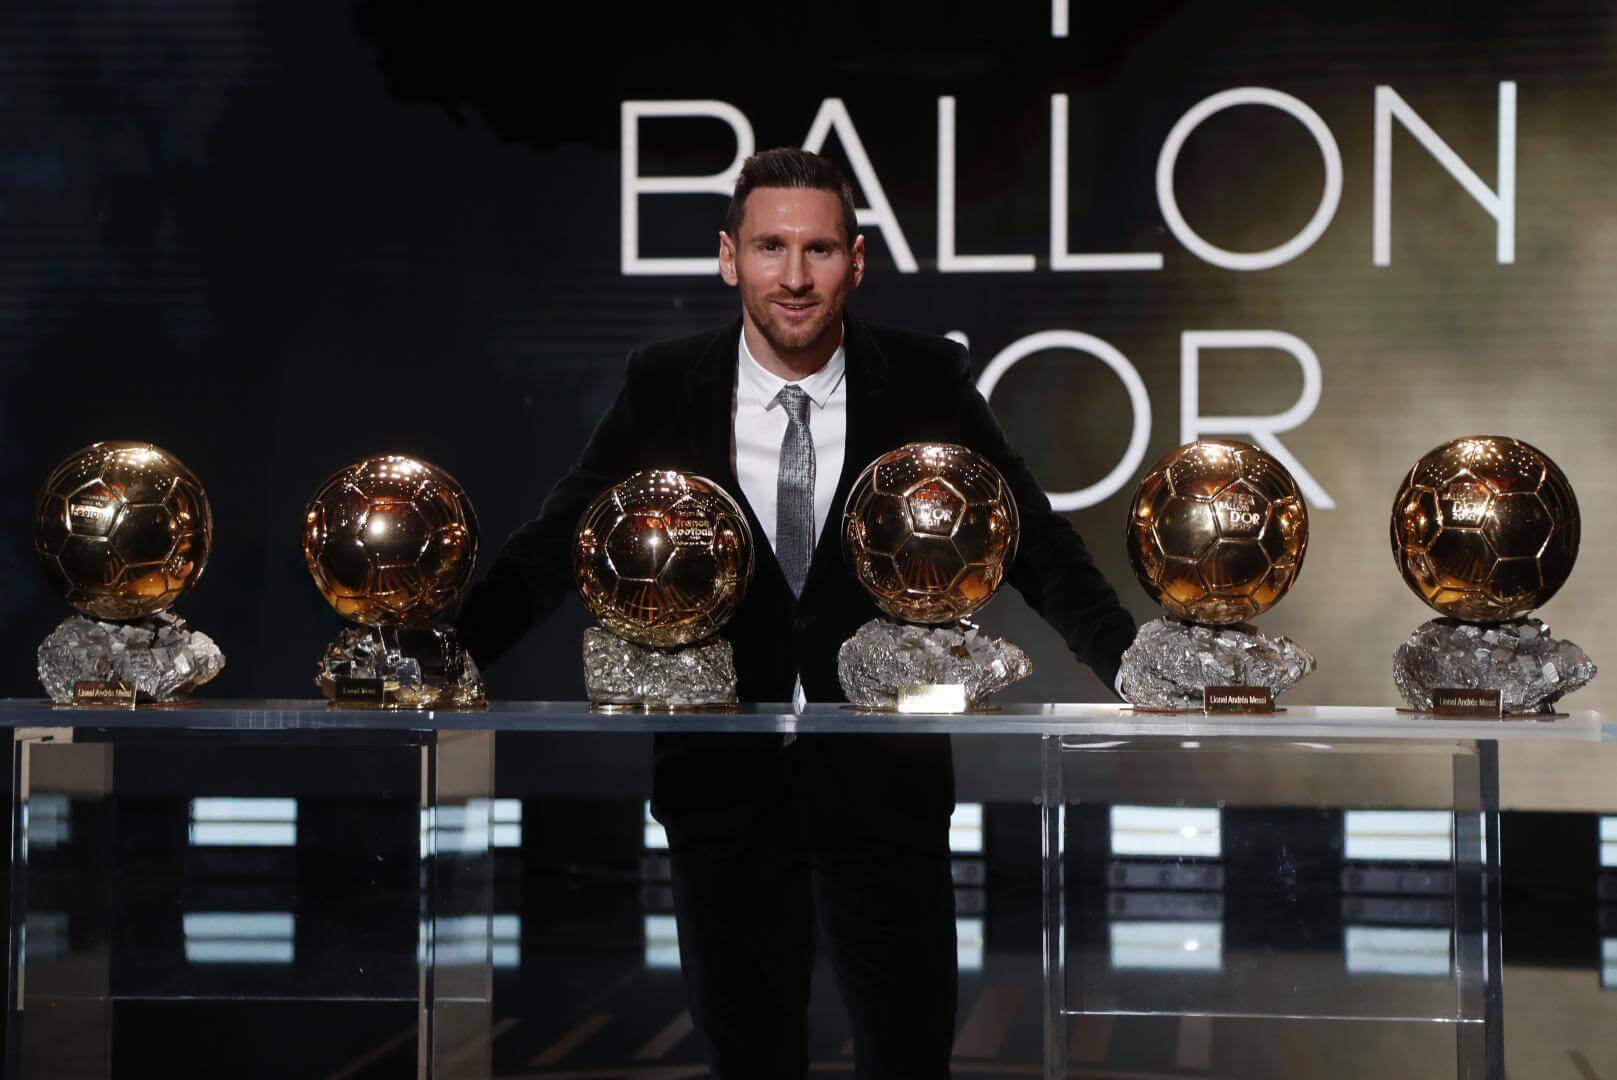 Ballon D'Or Winners From 1956 to Present